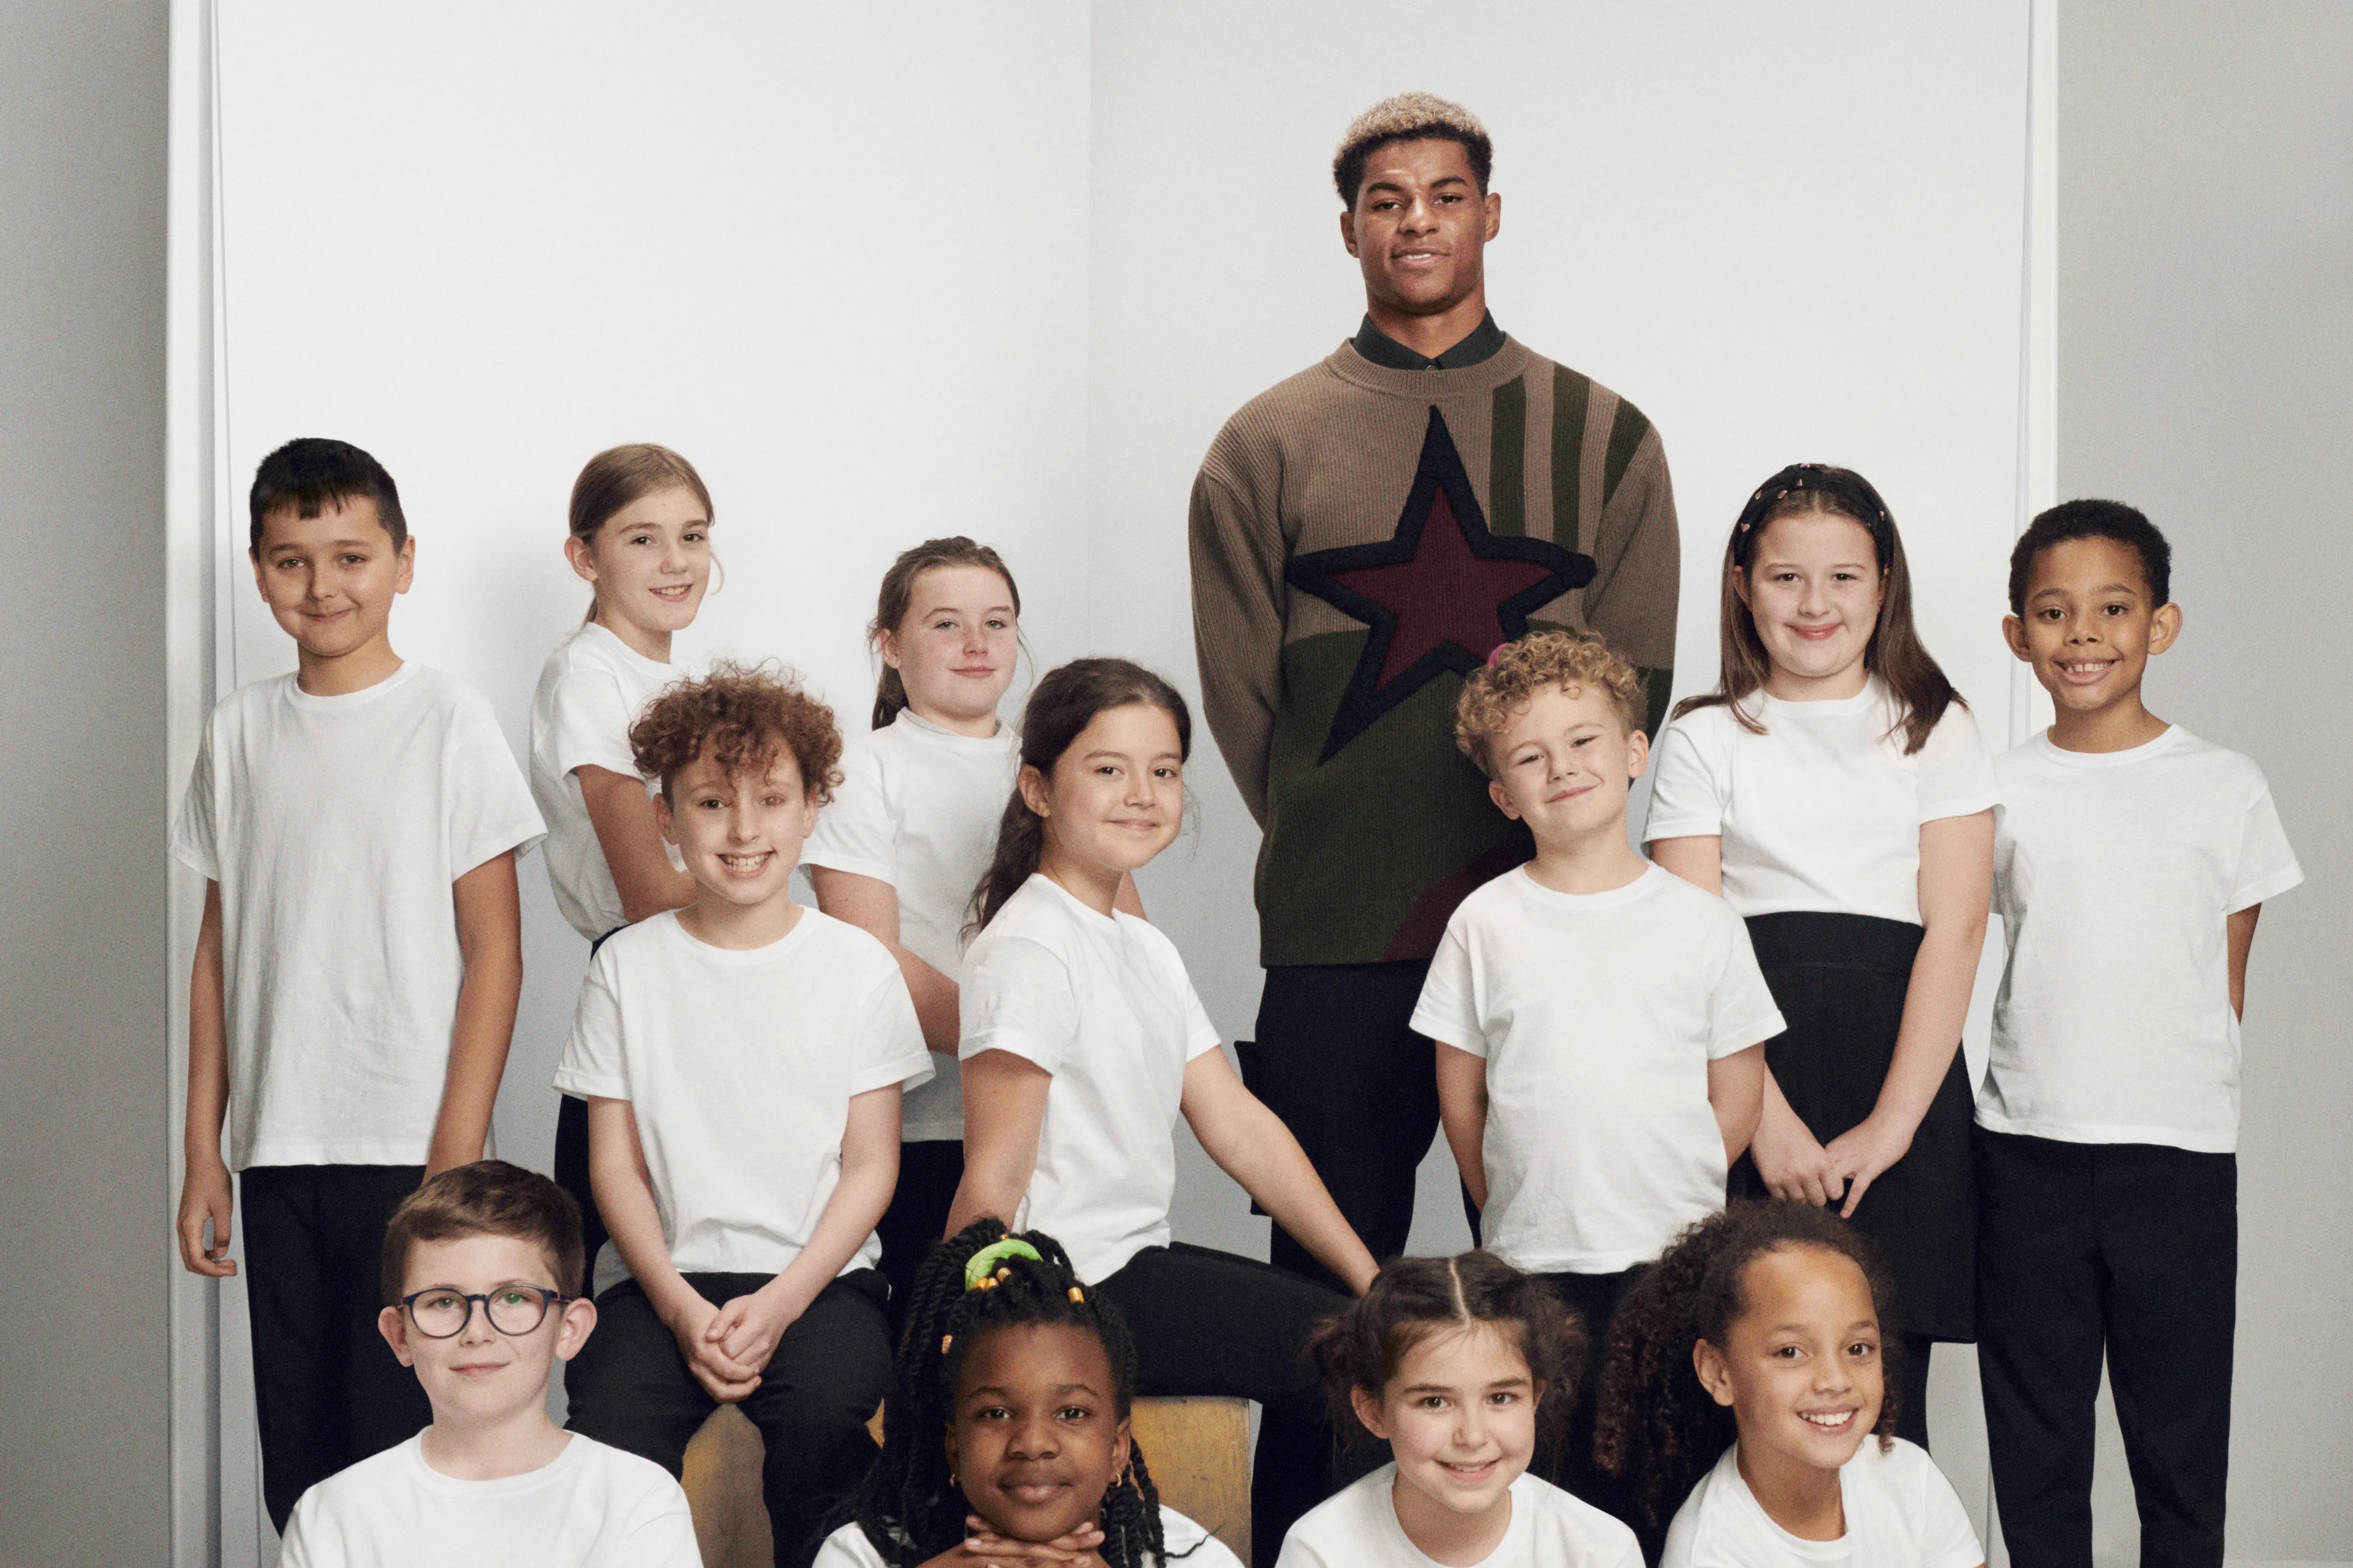 burberry-partners-with-marcus-rashford-mbe-to-help-young-people-develop-their-literacy-skills-c-cour-1682681851.jpg